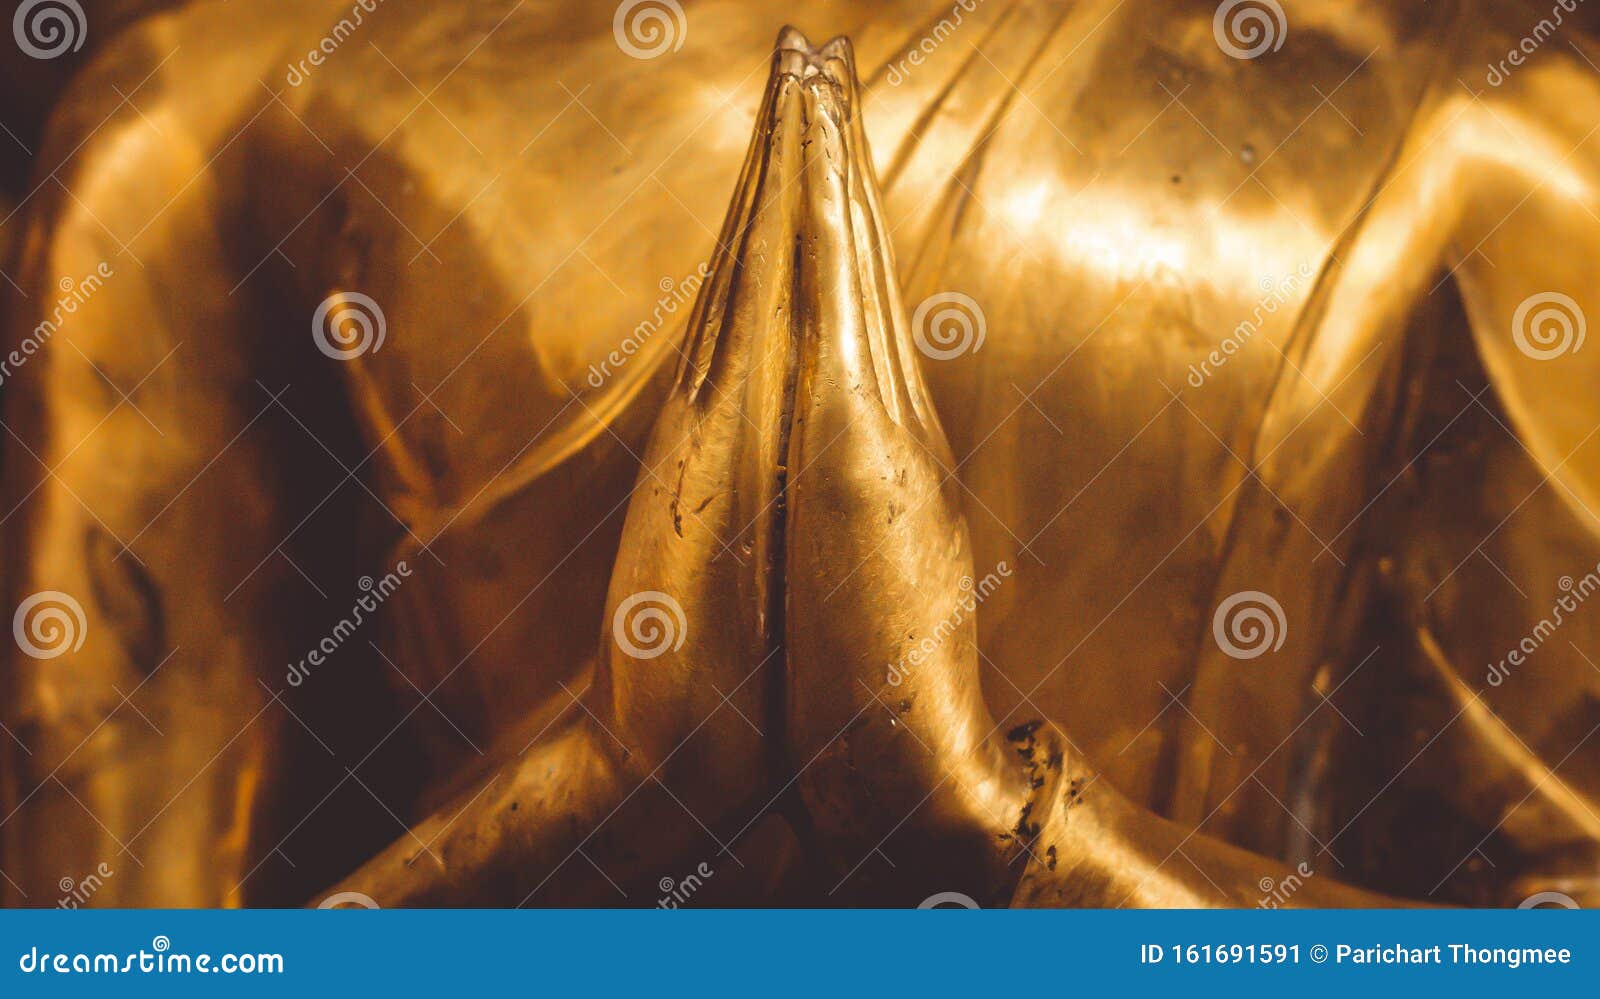 the essence of enlightenment: close-up of buddha's hand